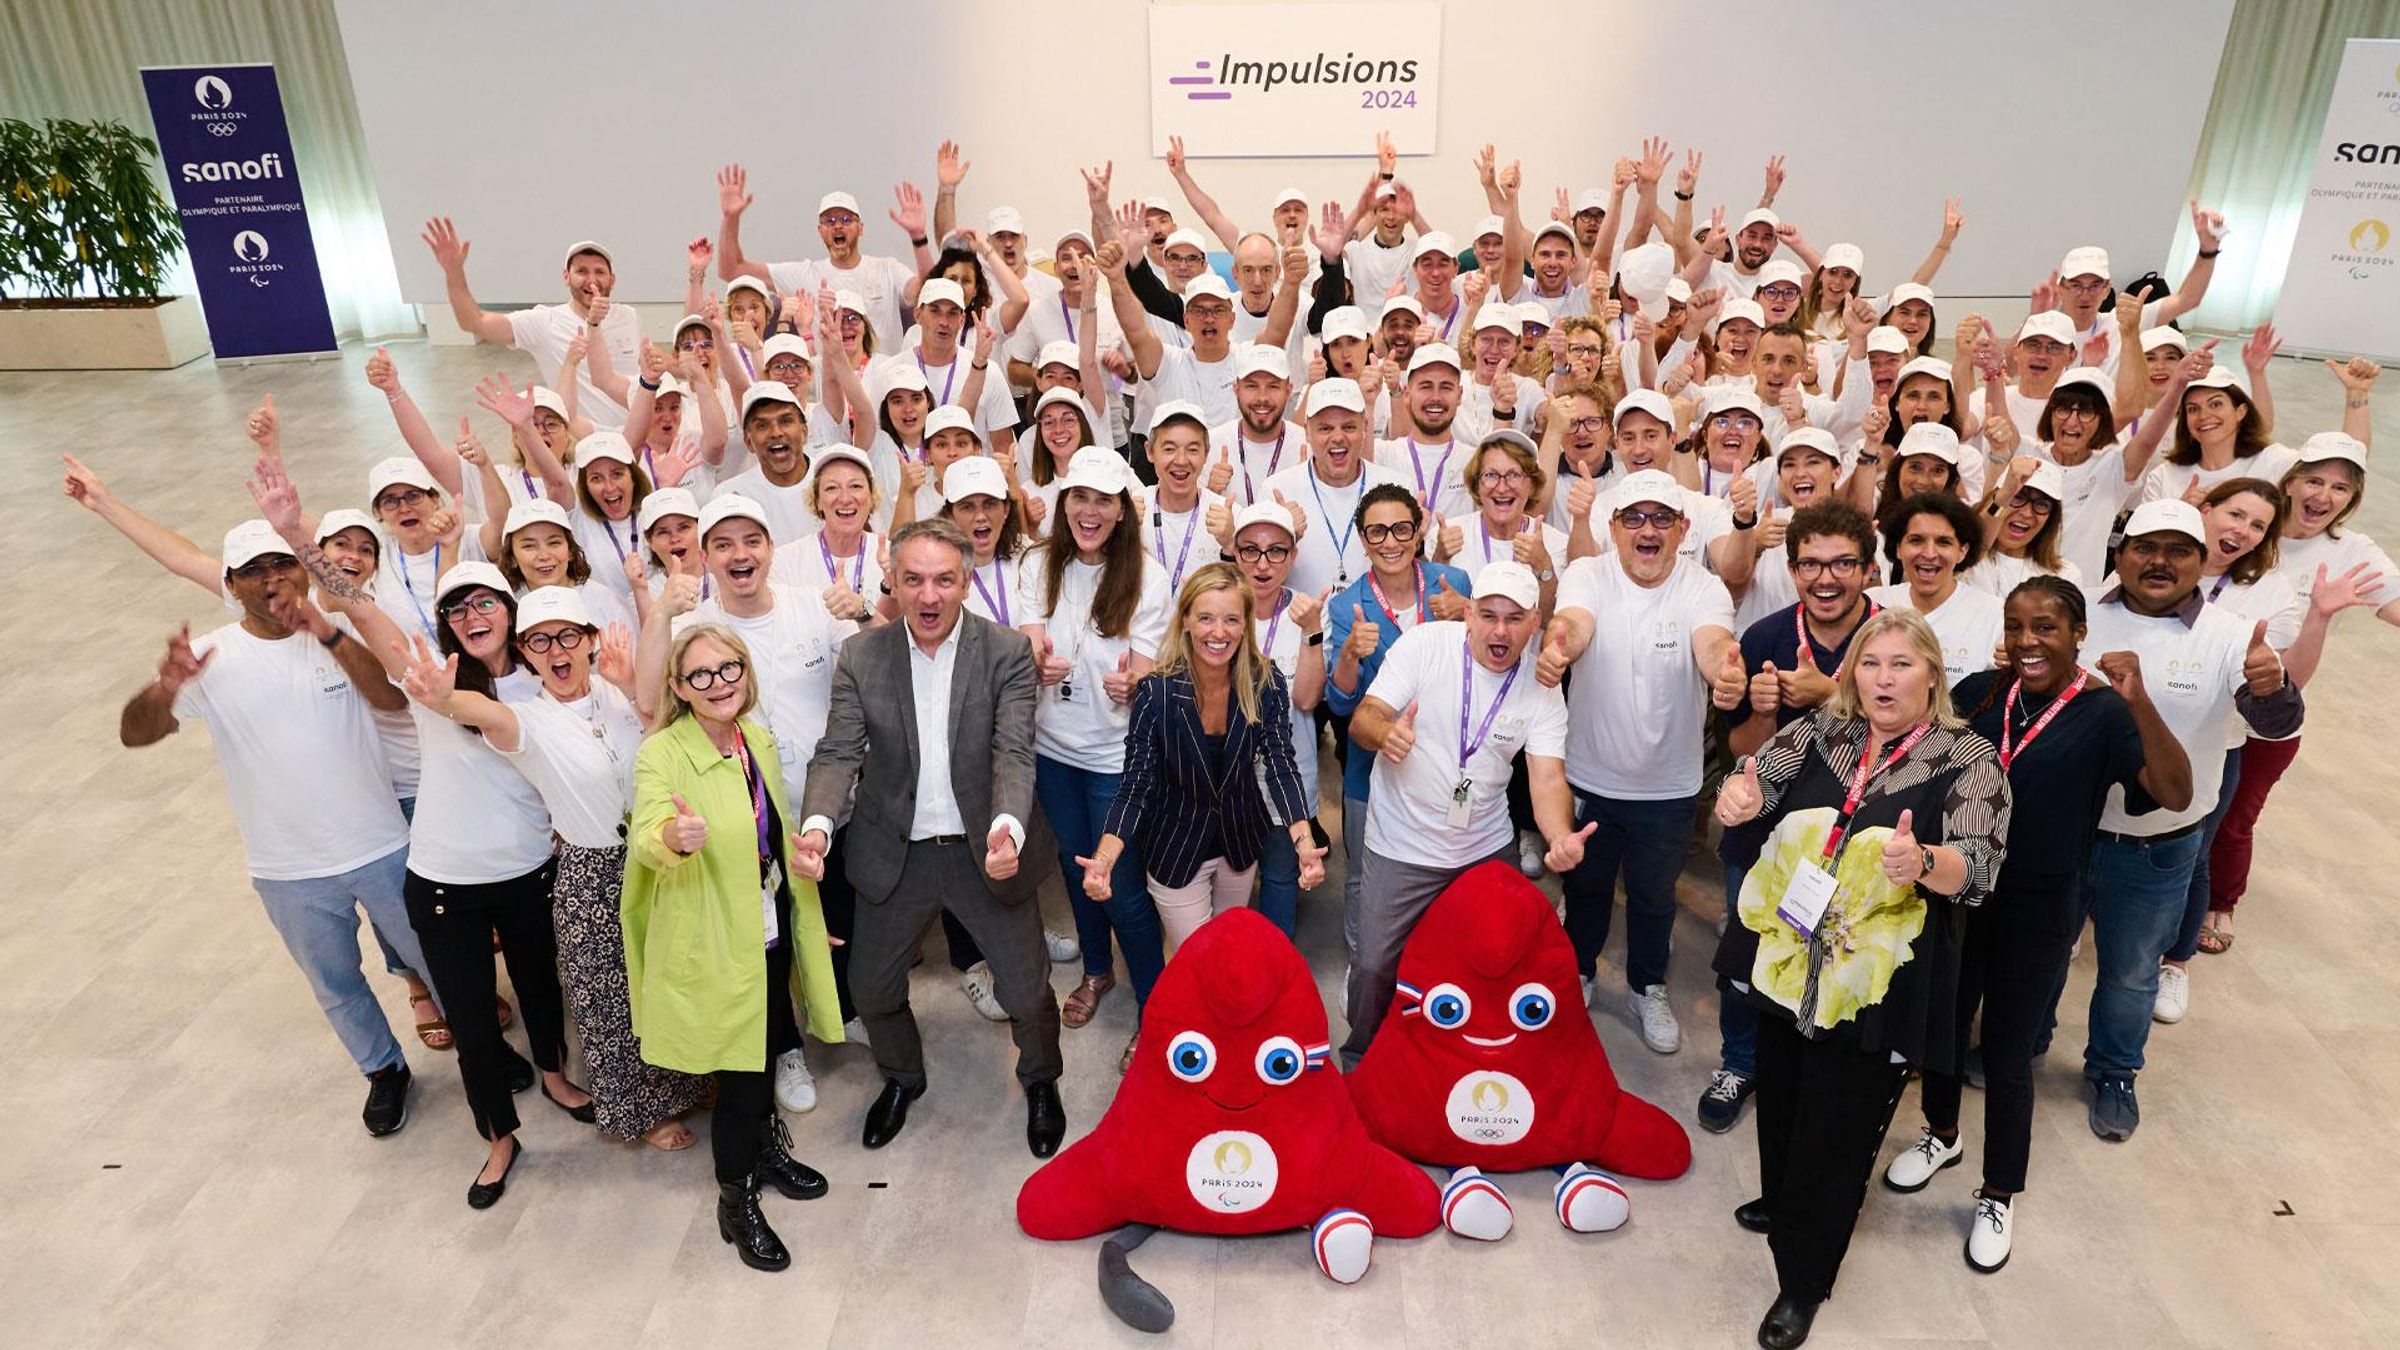 Sanofi volunteers for the Olympic and Paralympic Games Paris 2024, Marcy l’Etoile